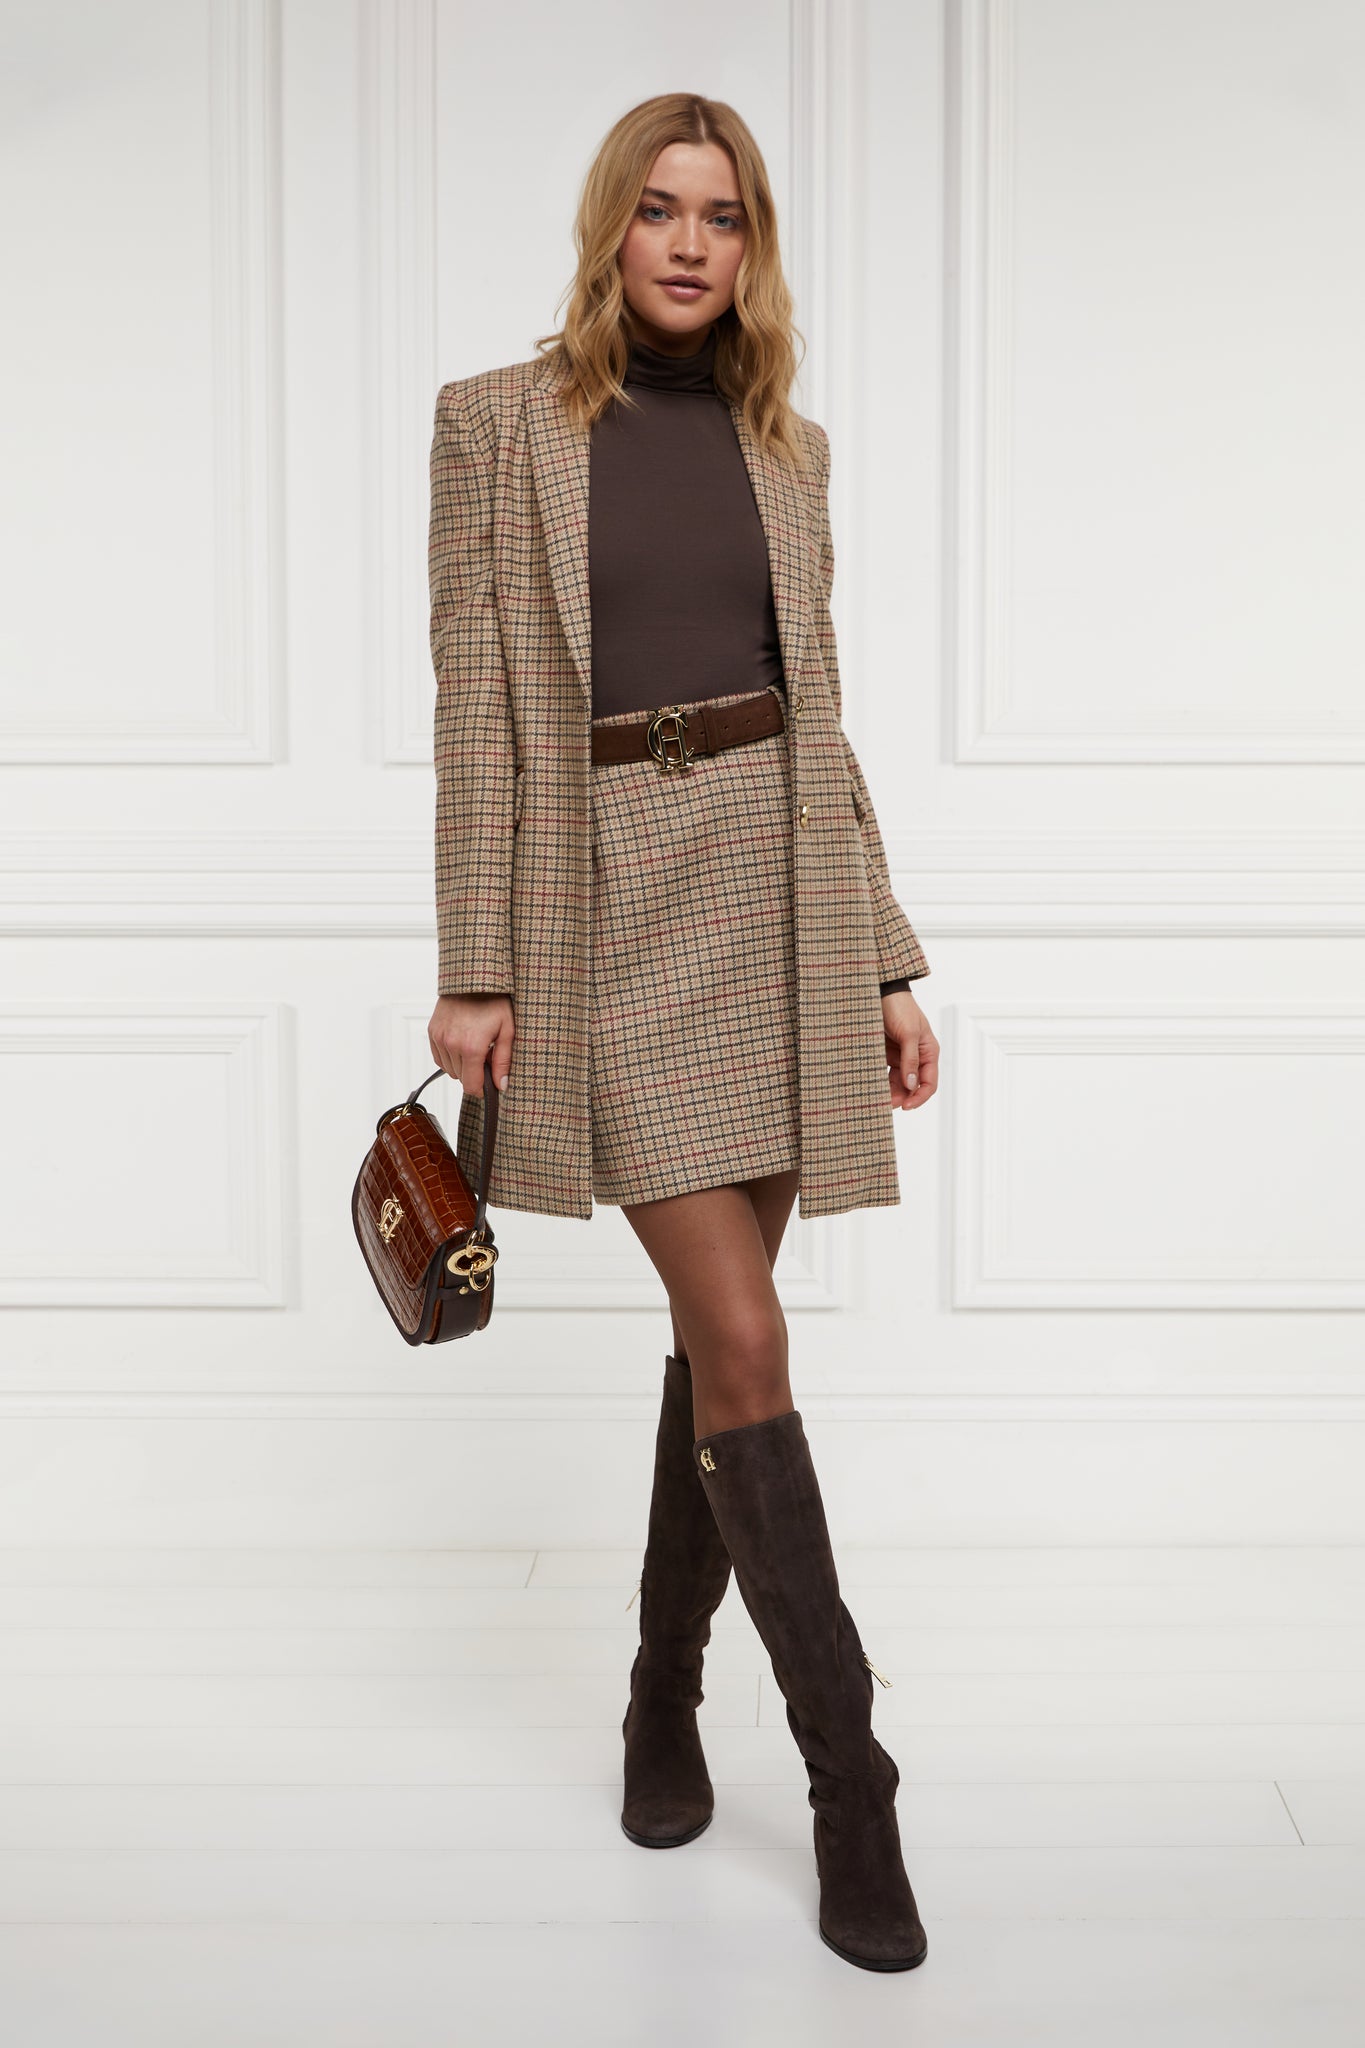 womens light brown and red tweed pencil mini skirt with concealed zip fastening on centre back with gold hc button above zip worn with mid length single breasted coat in matching colourway